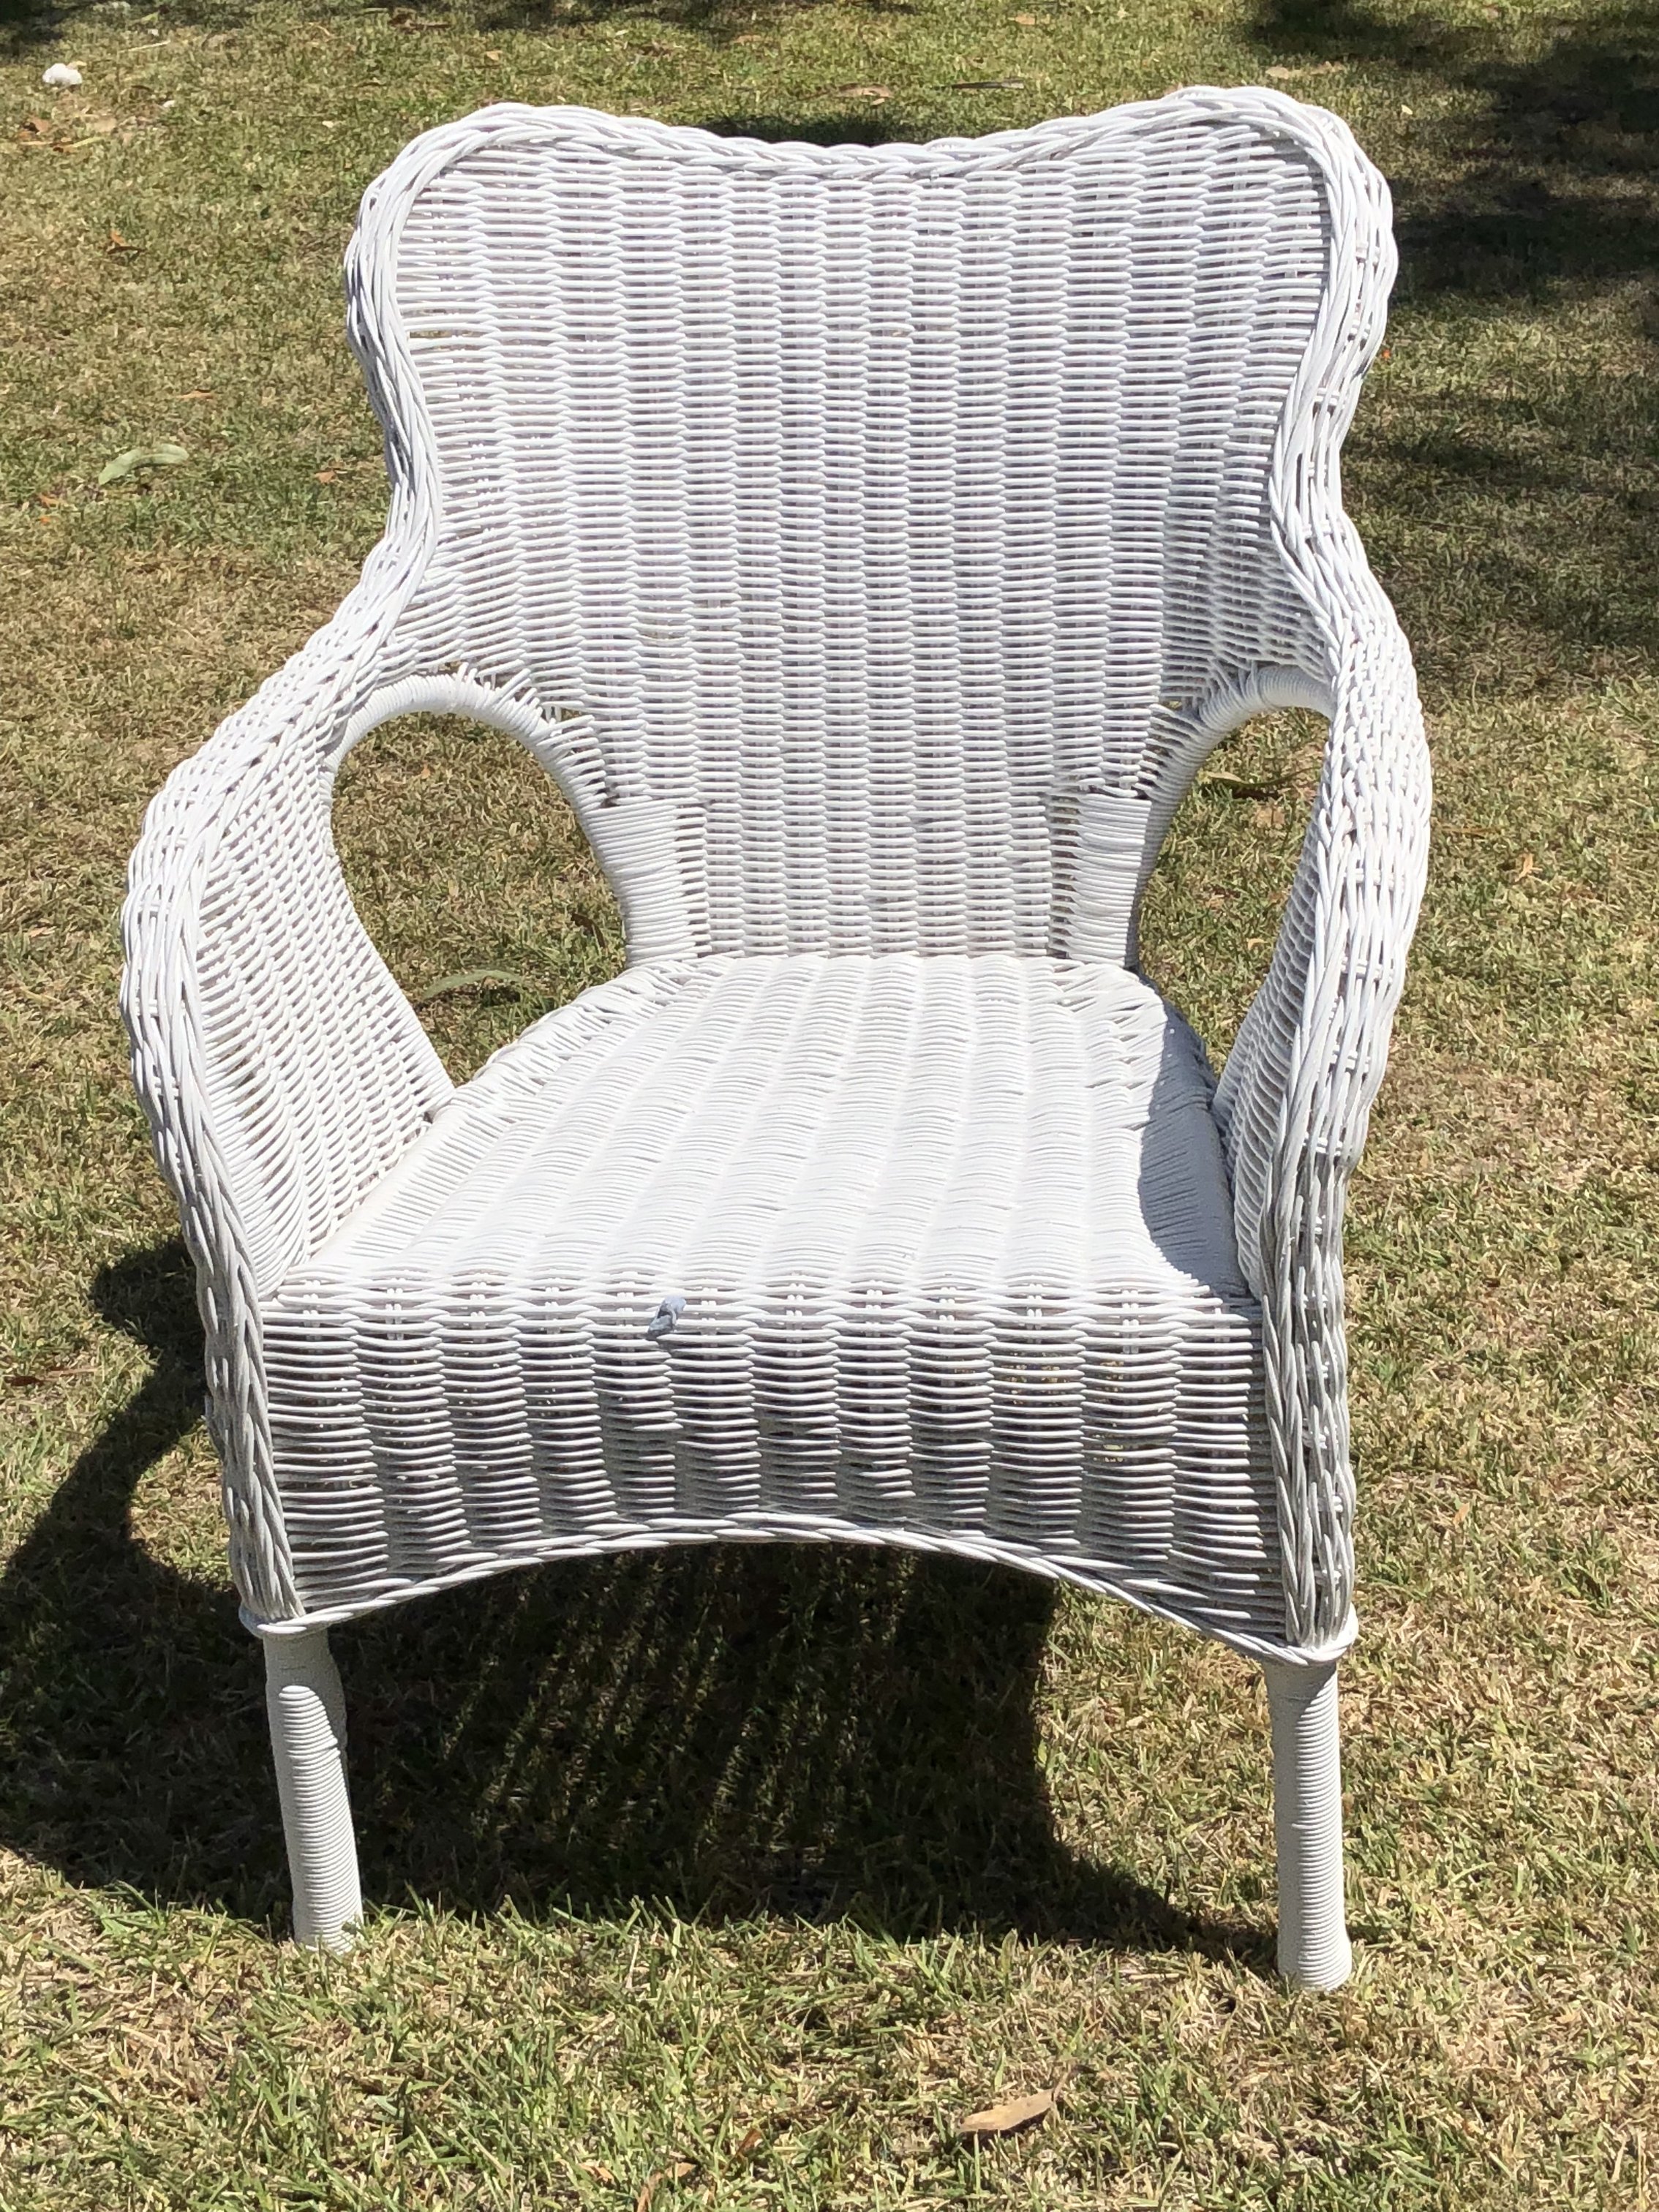 WHITE SINGLE WICKER CANE ARM CHAIRS – The Wedding + Event Creators